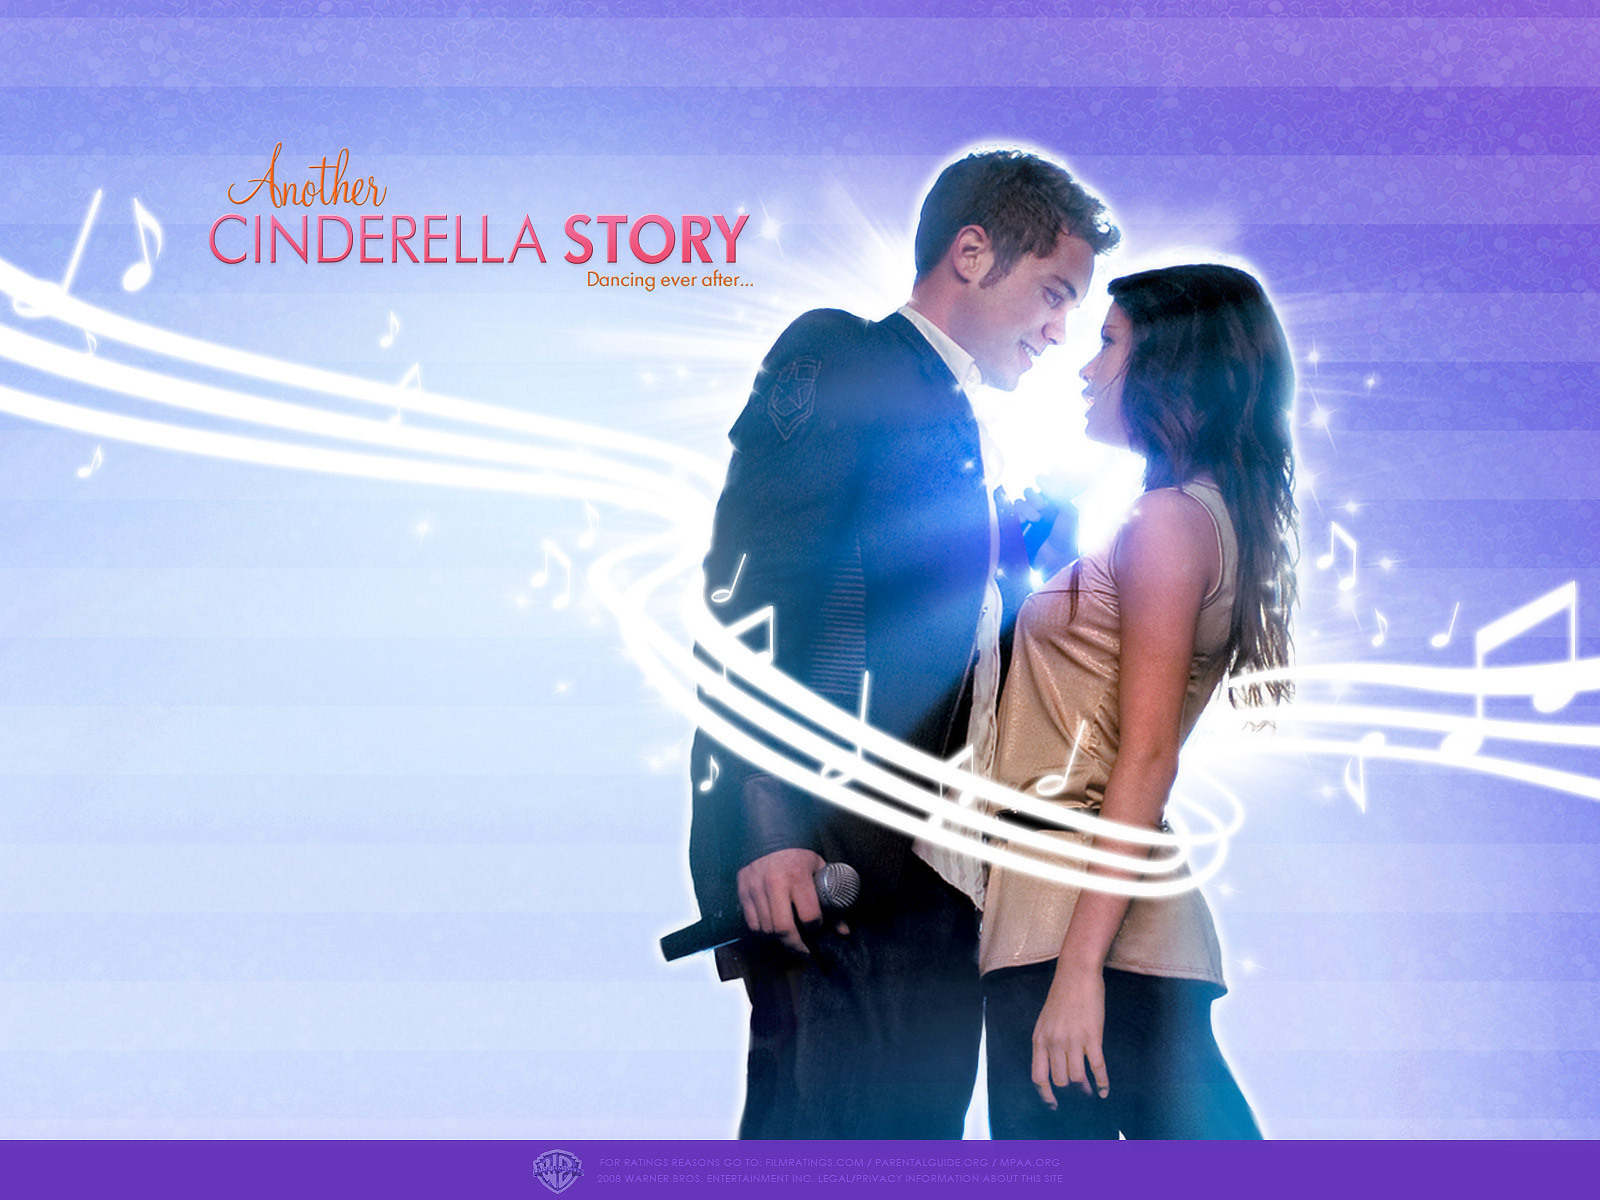 http://images2.fanpop.com/images/photos/3400000/walpaper-2-another-cinderella-story-3469463-1600-1200.jpg